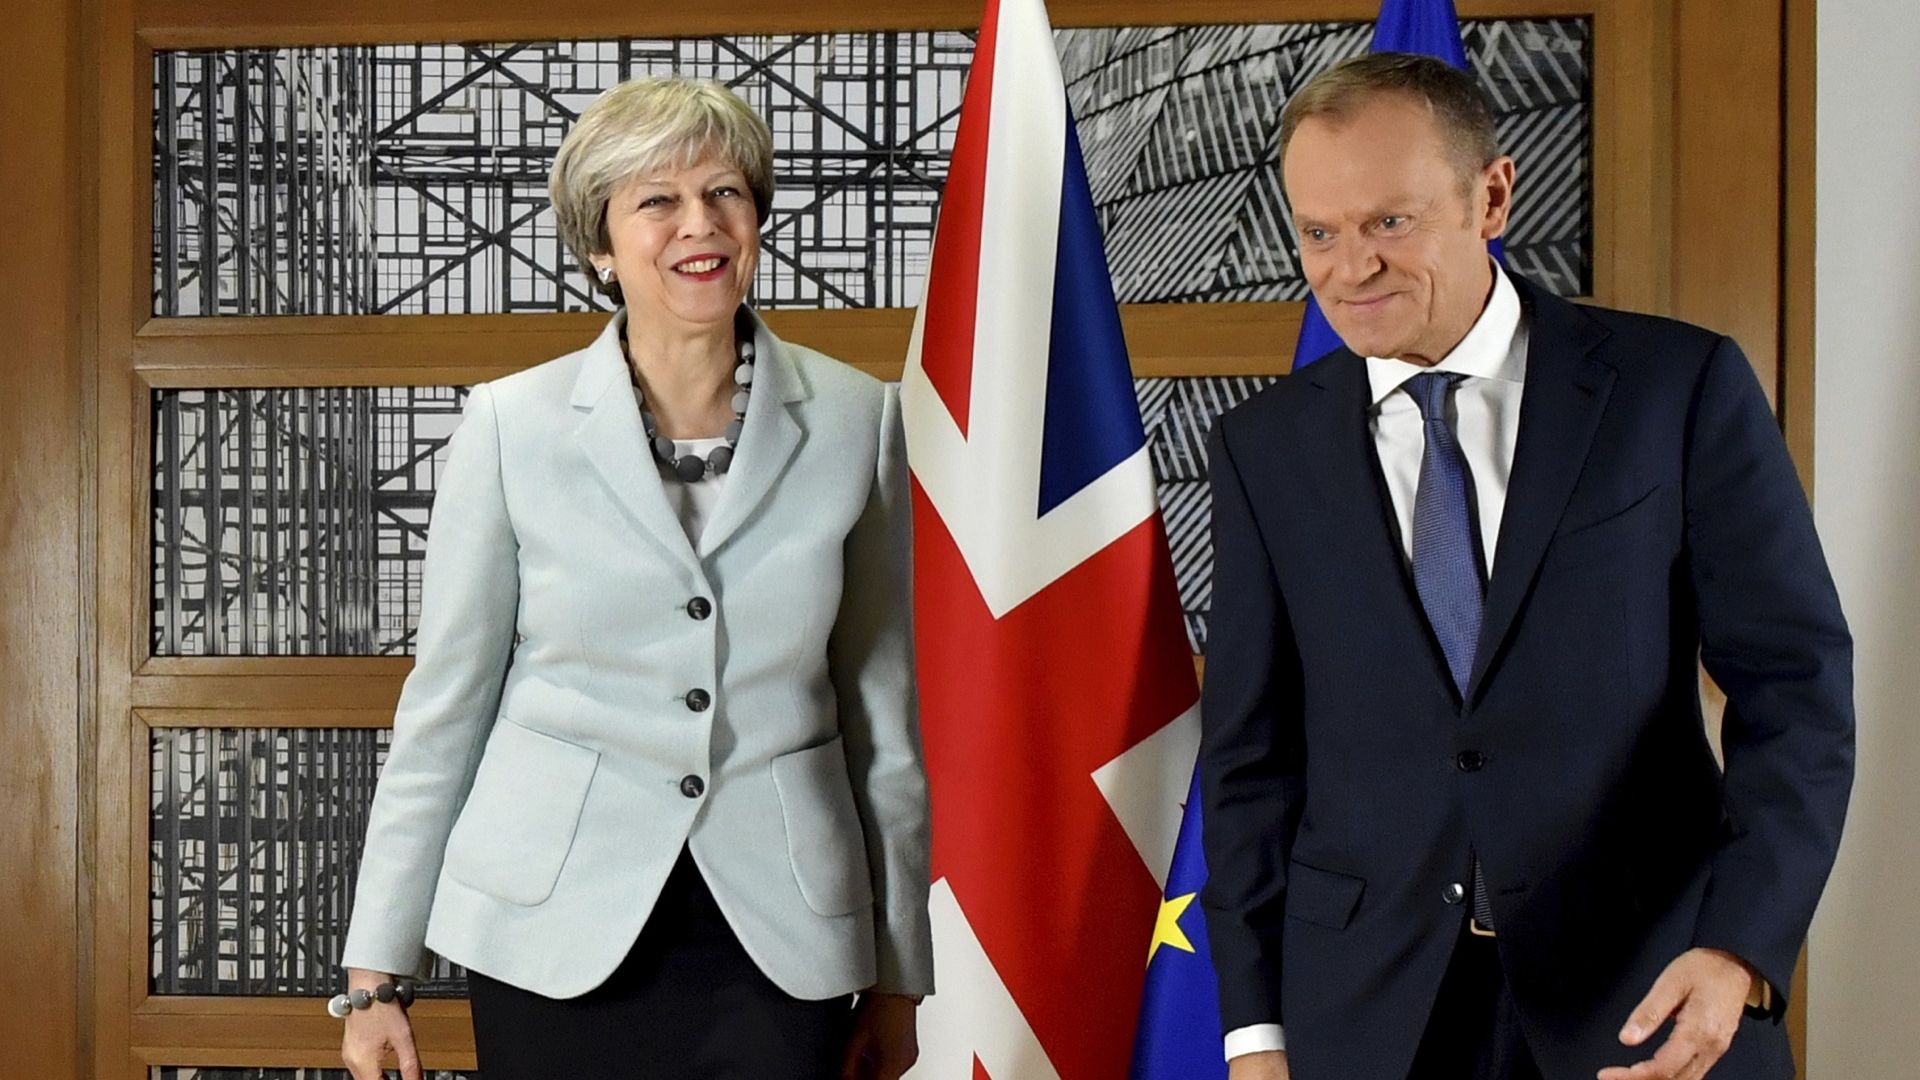 Prime Minister Theresa May and European Council President Donald Tusk